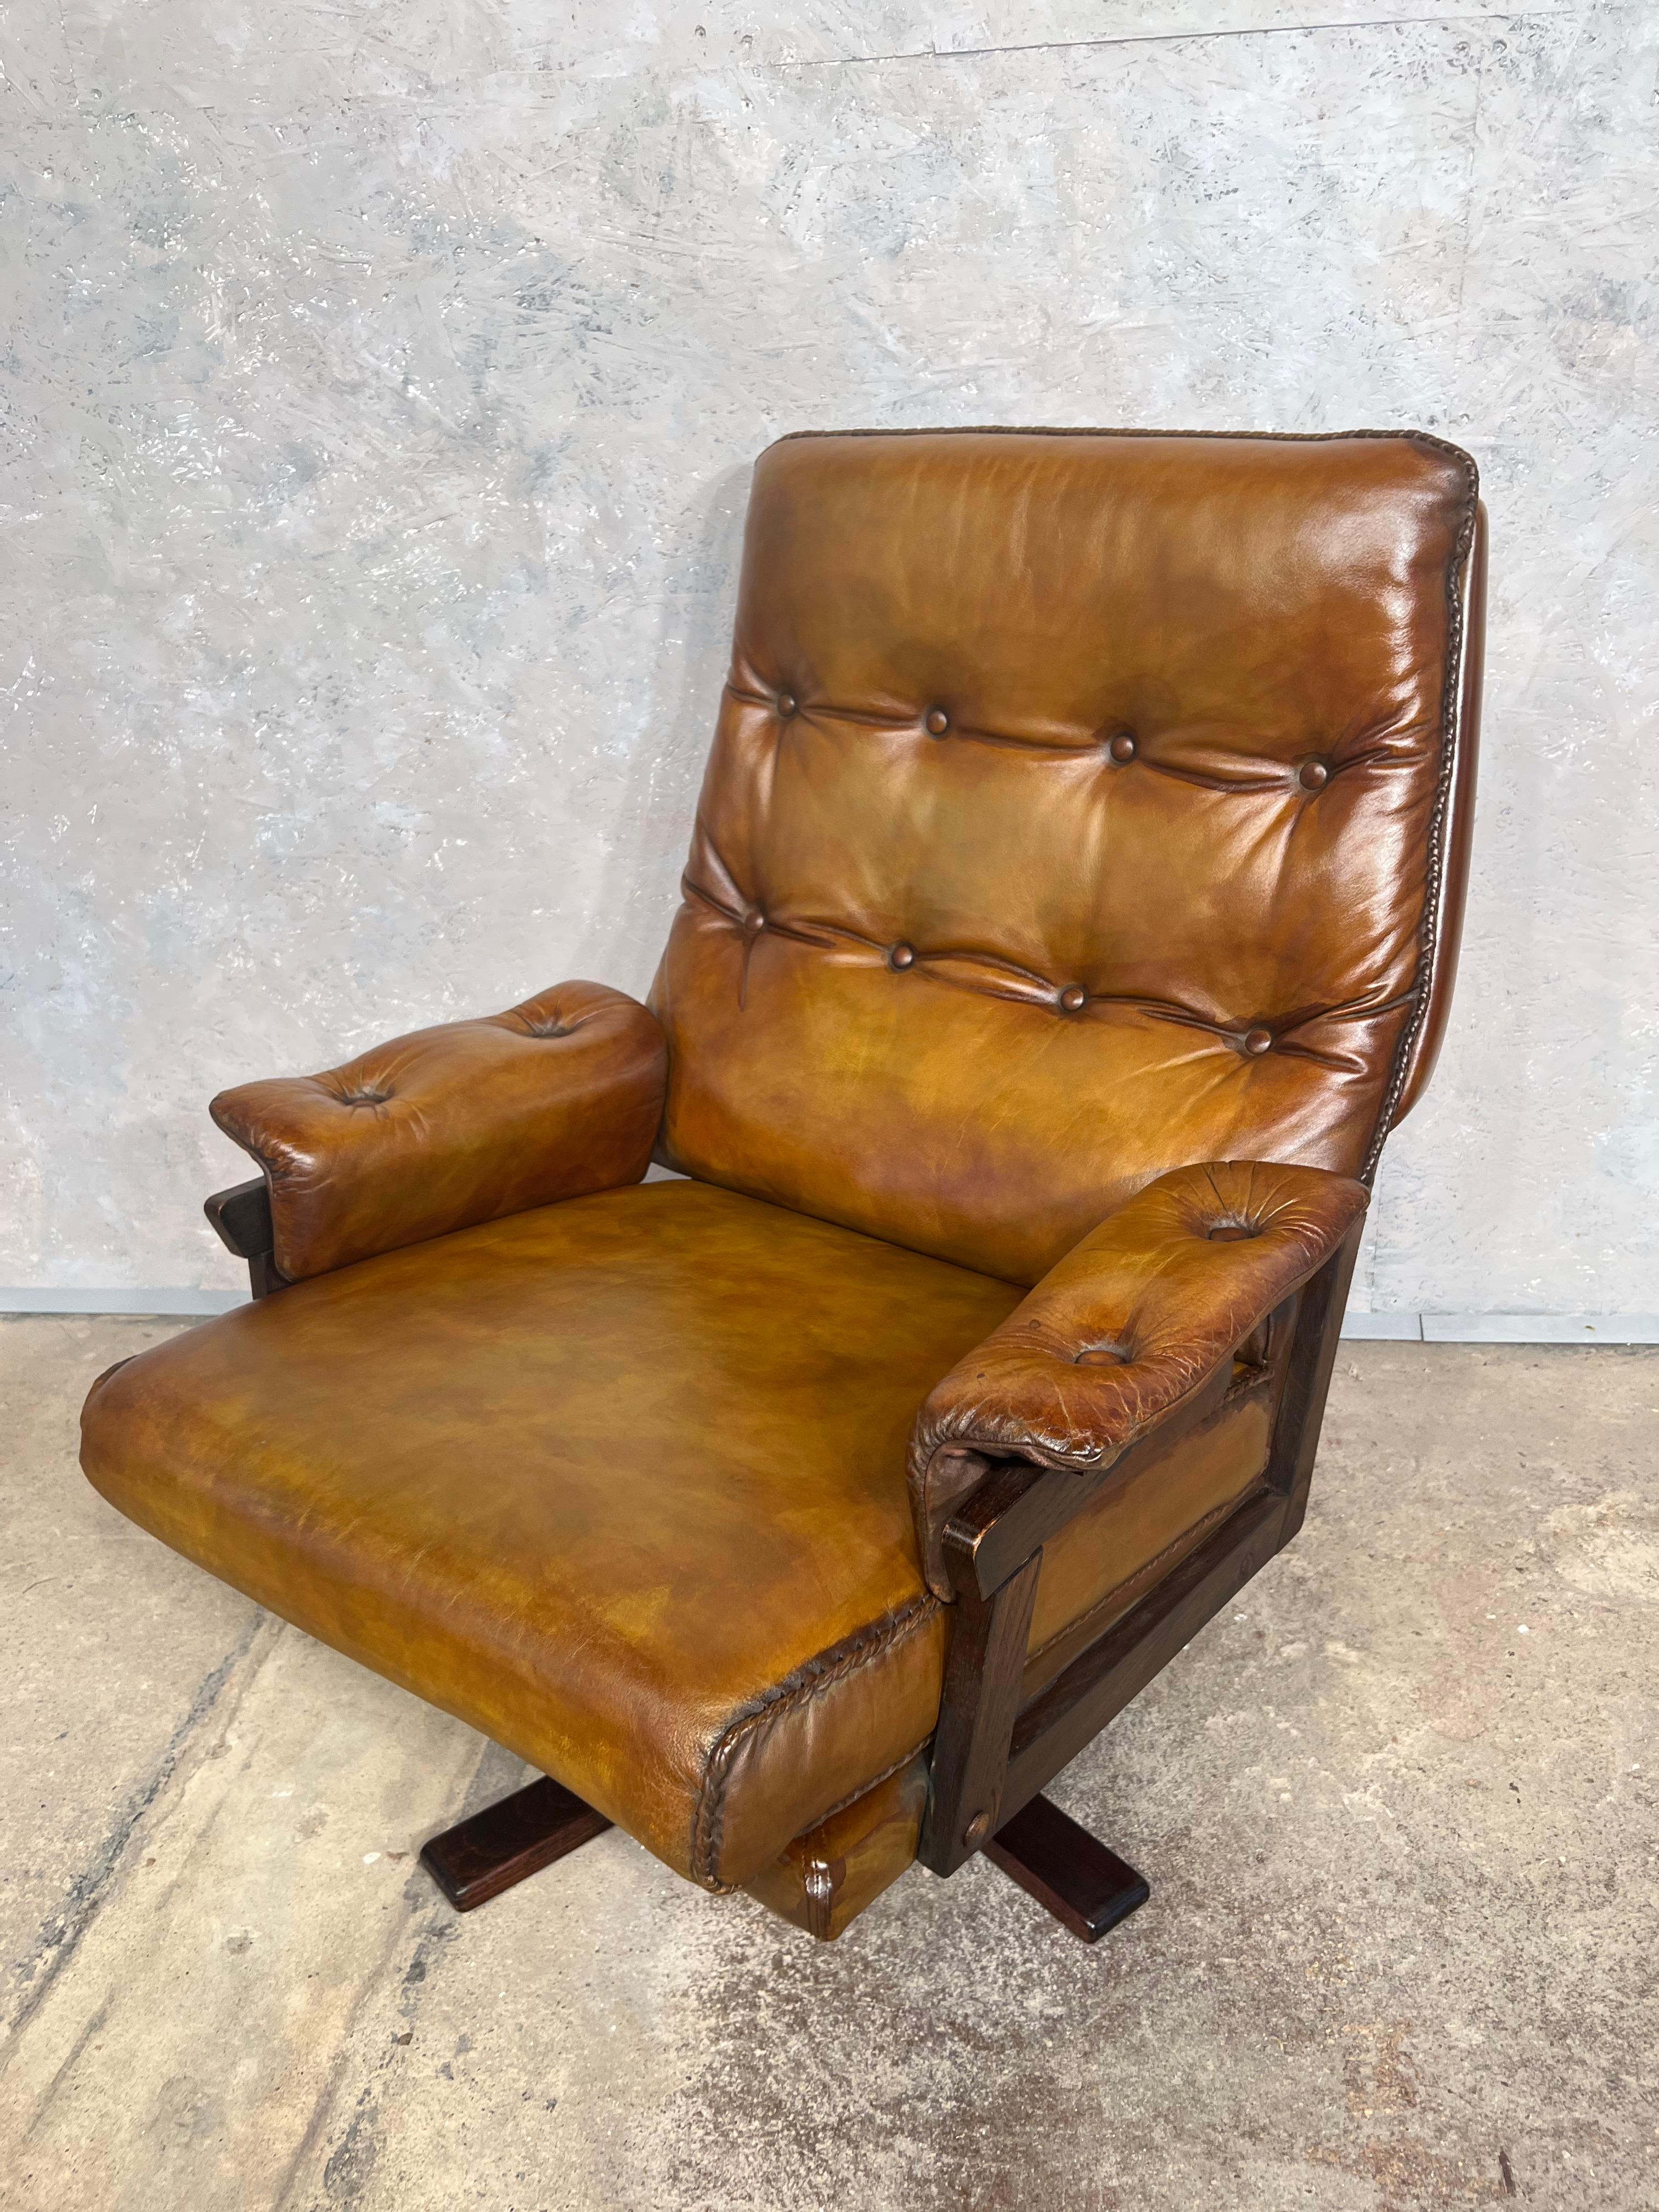 Vintage Arne Norell Leather Swivel Chair Hand dyed Tan #460 For Sale 8